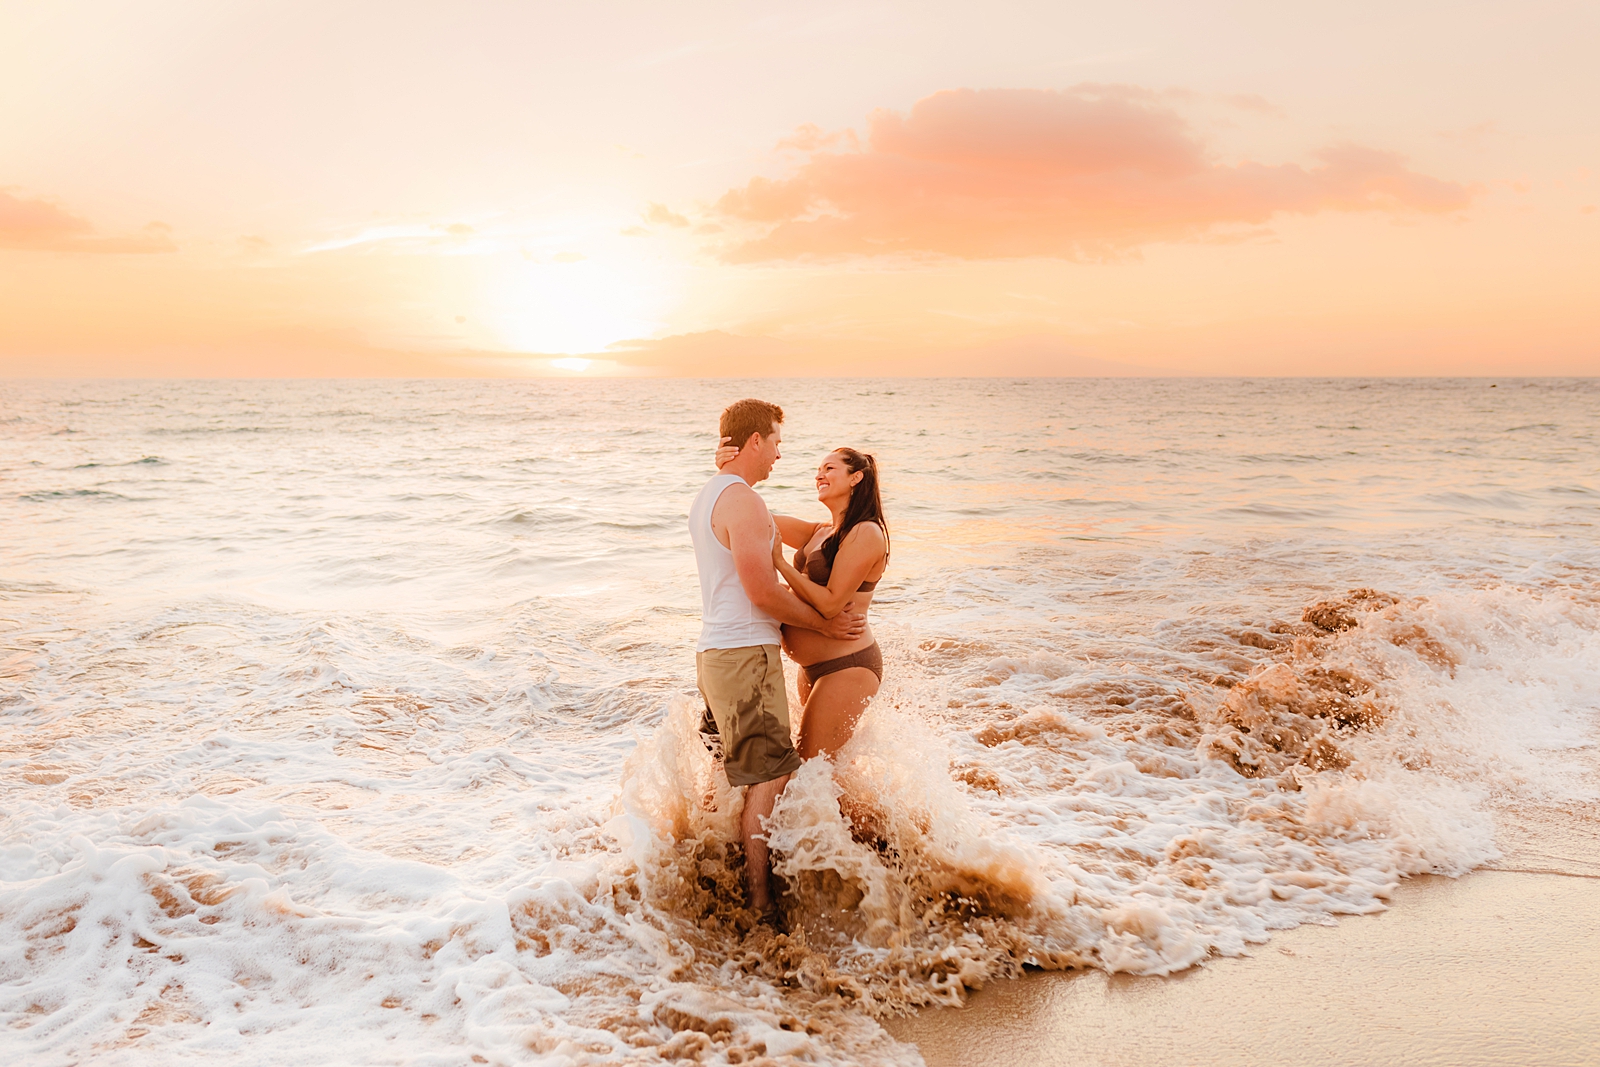 Sunset beach maternity portrait captured on maui featuring woman in brown bikini getting splashed by the waves